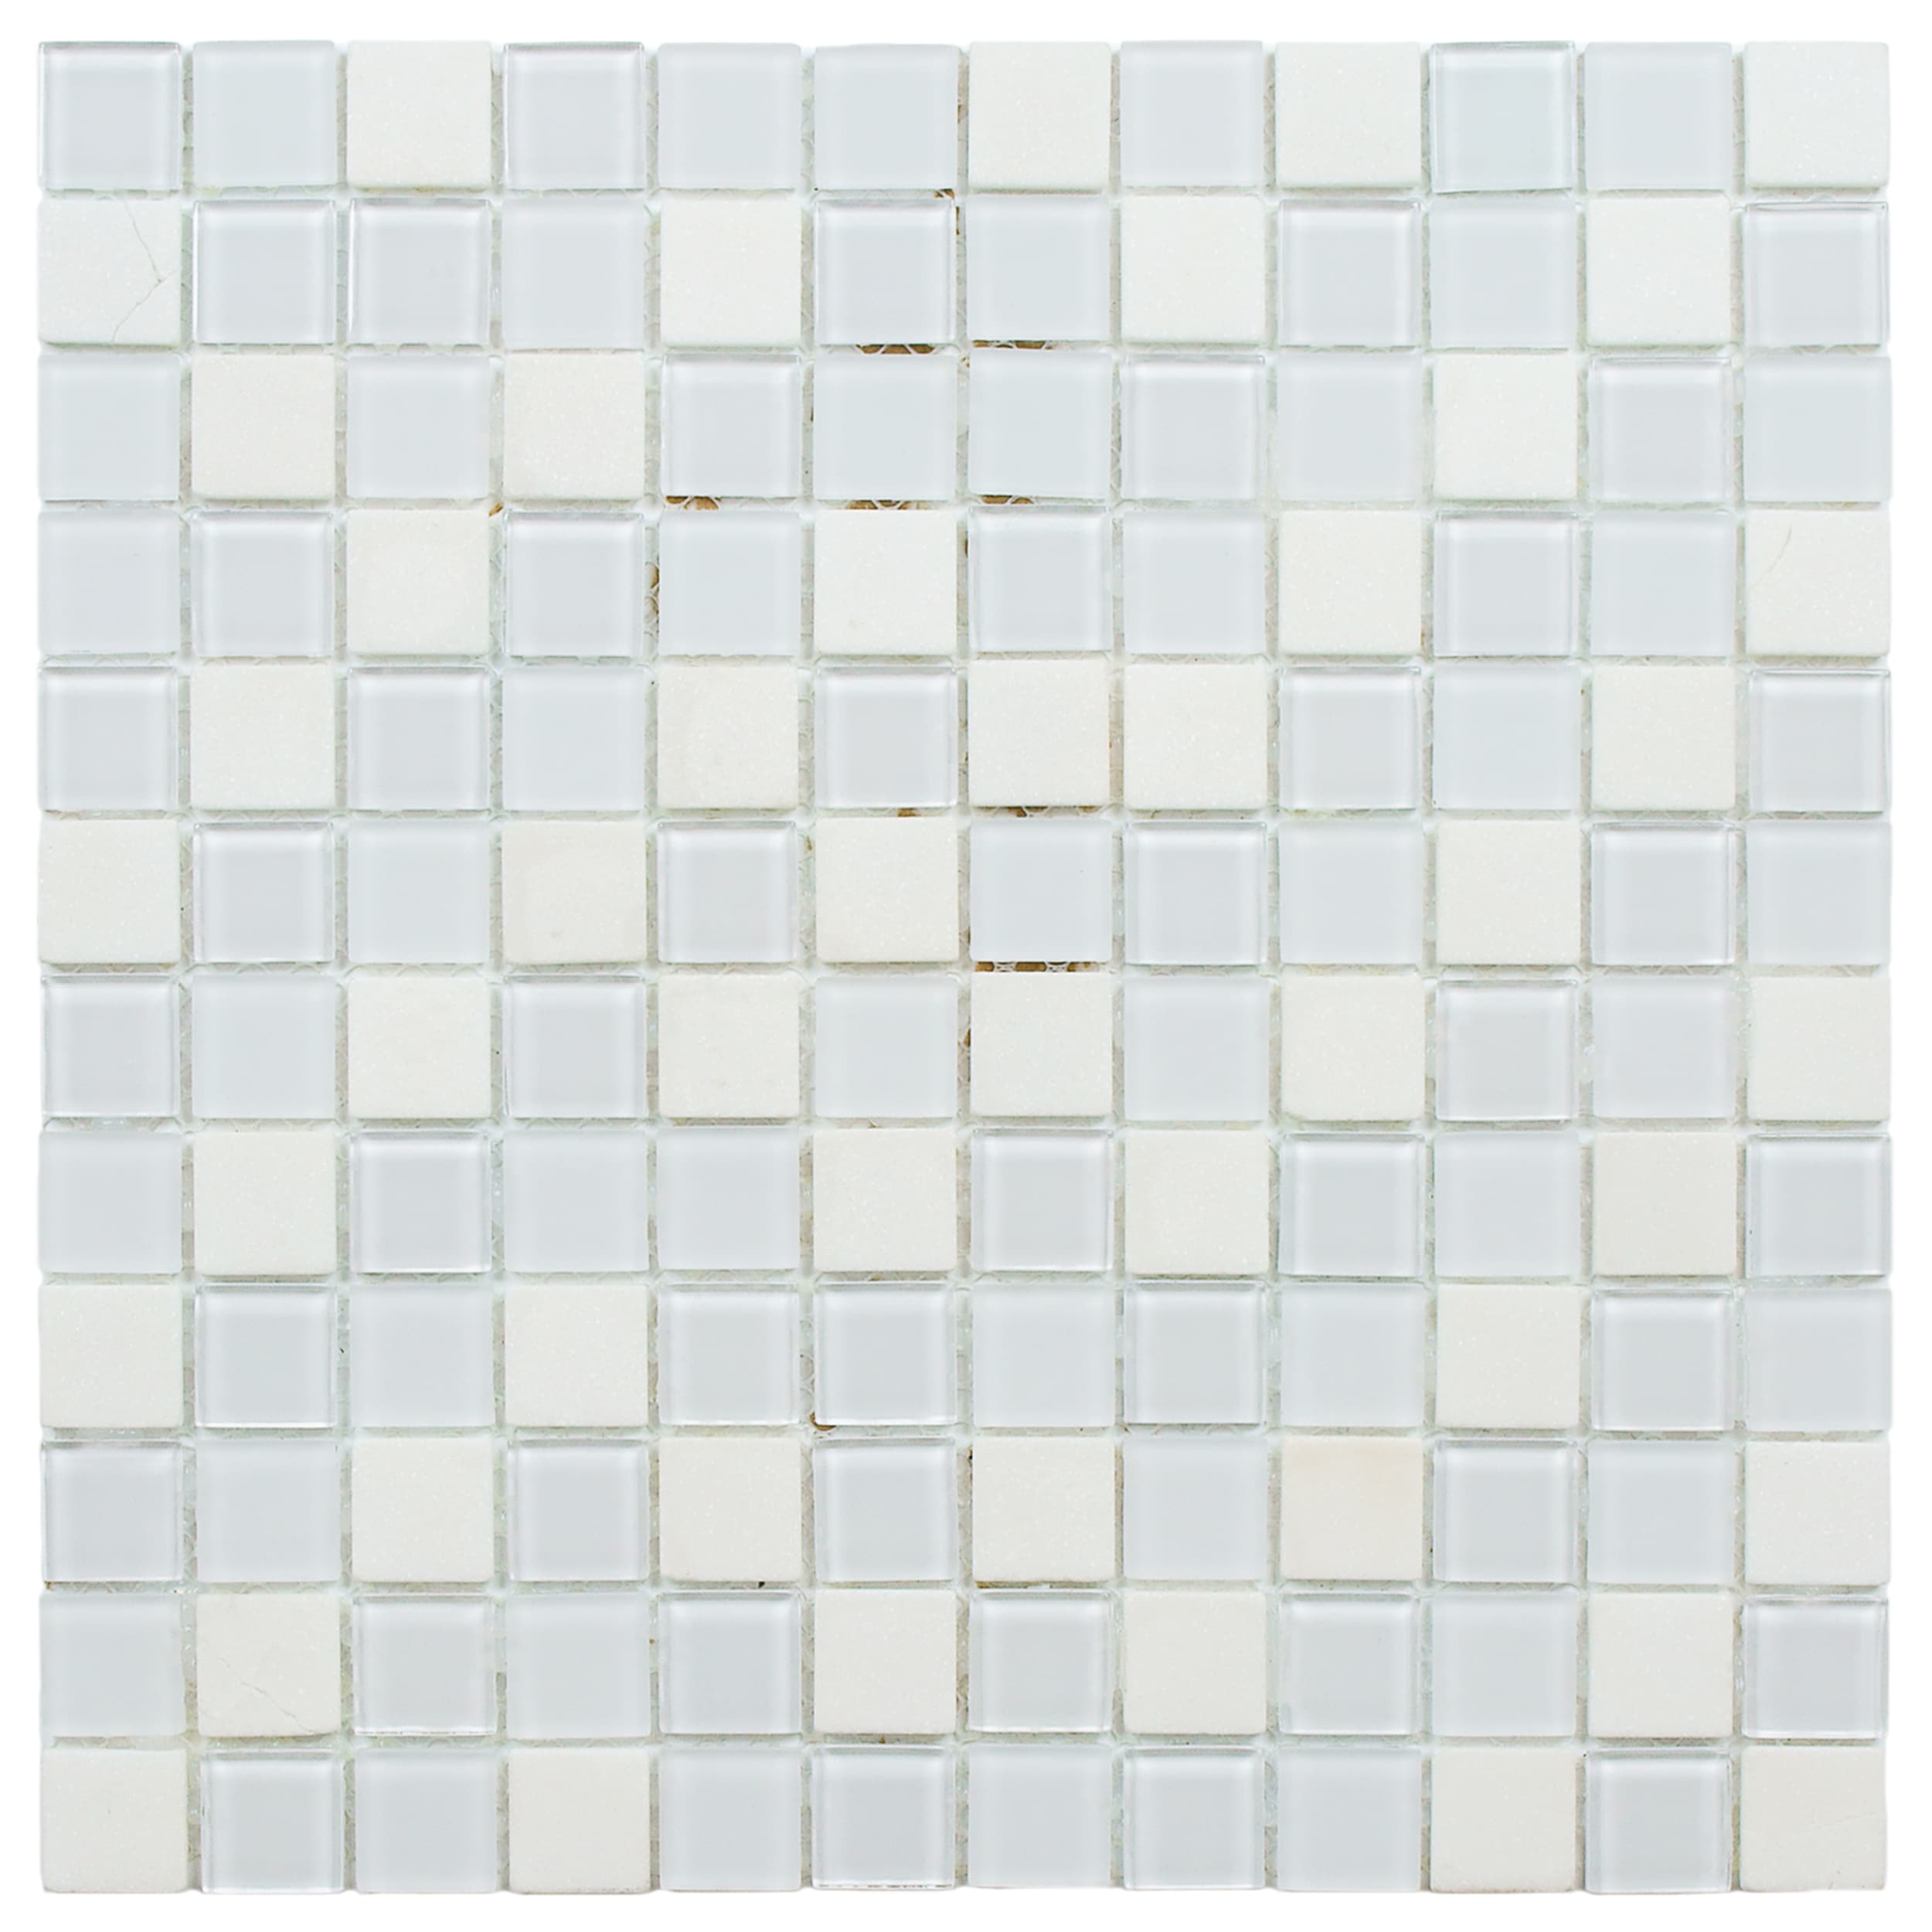 Somertile 11.5 inch Chroma Square Cordia Glass And Stone Mosaic Tile (pack Of 10)